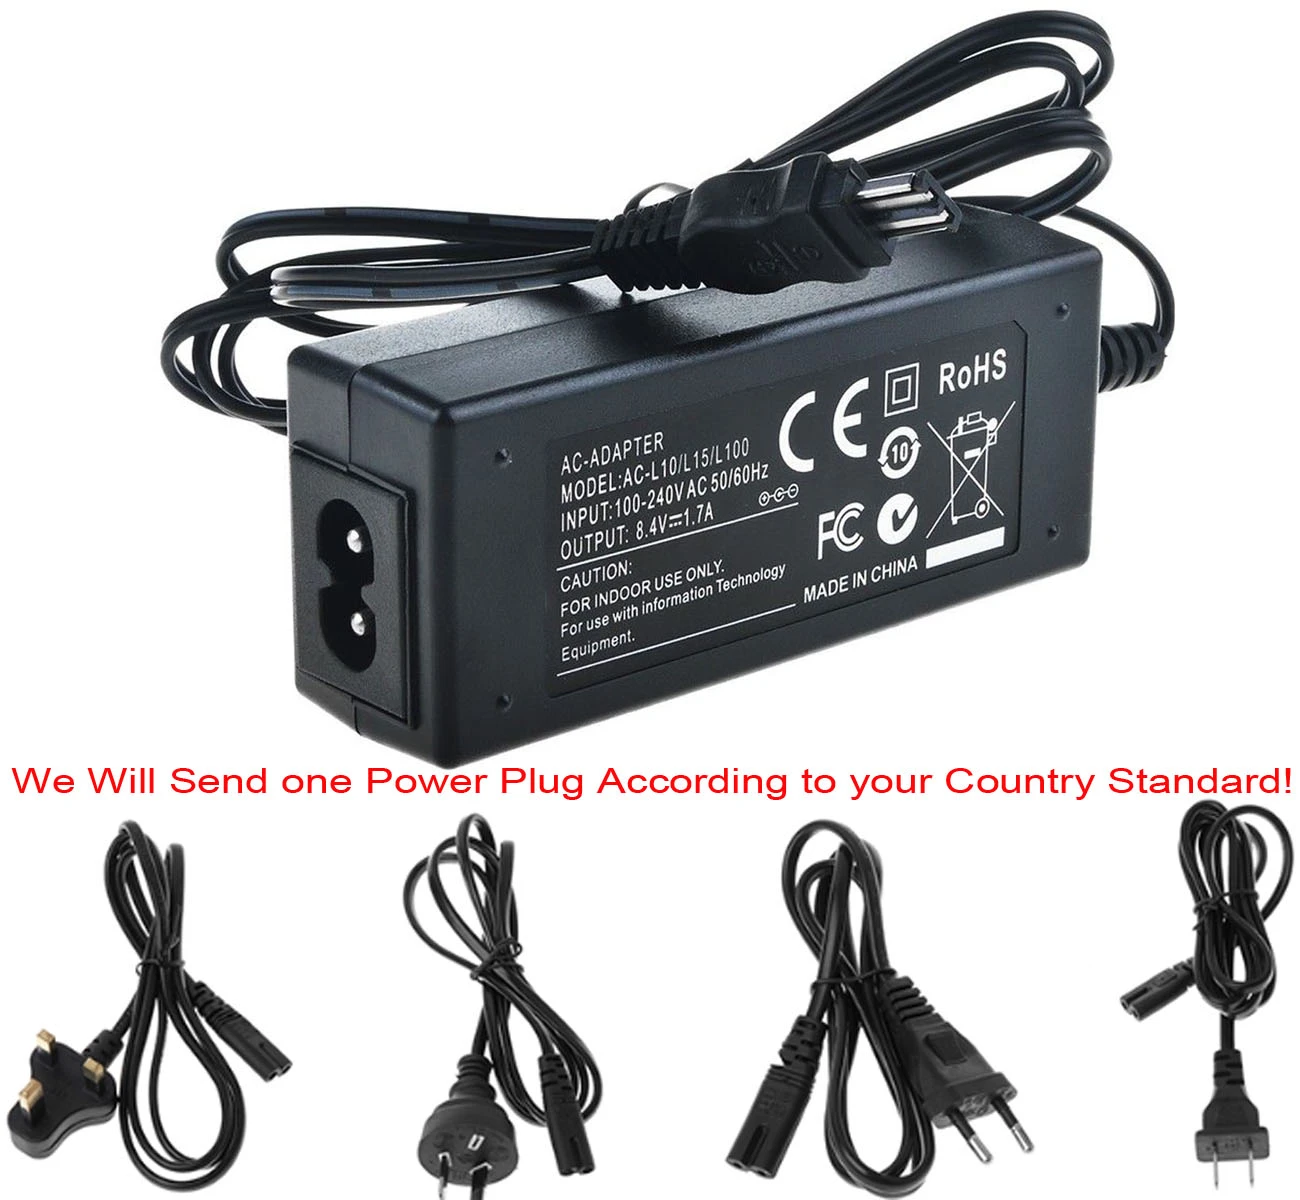 LCD Dual Fast Battery Charger for Sony DCR-DVD505E DCR-DVD510E Handycam Camcorder DCR-DVD506E DCR-DVD508E 